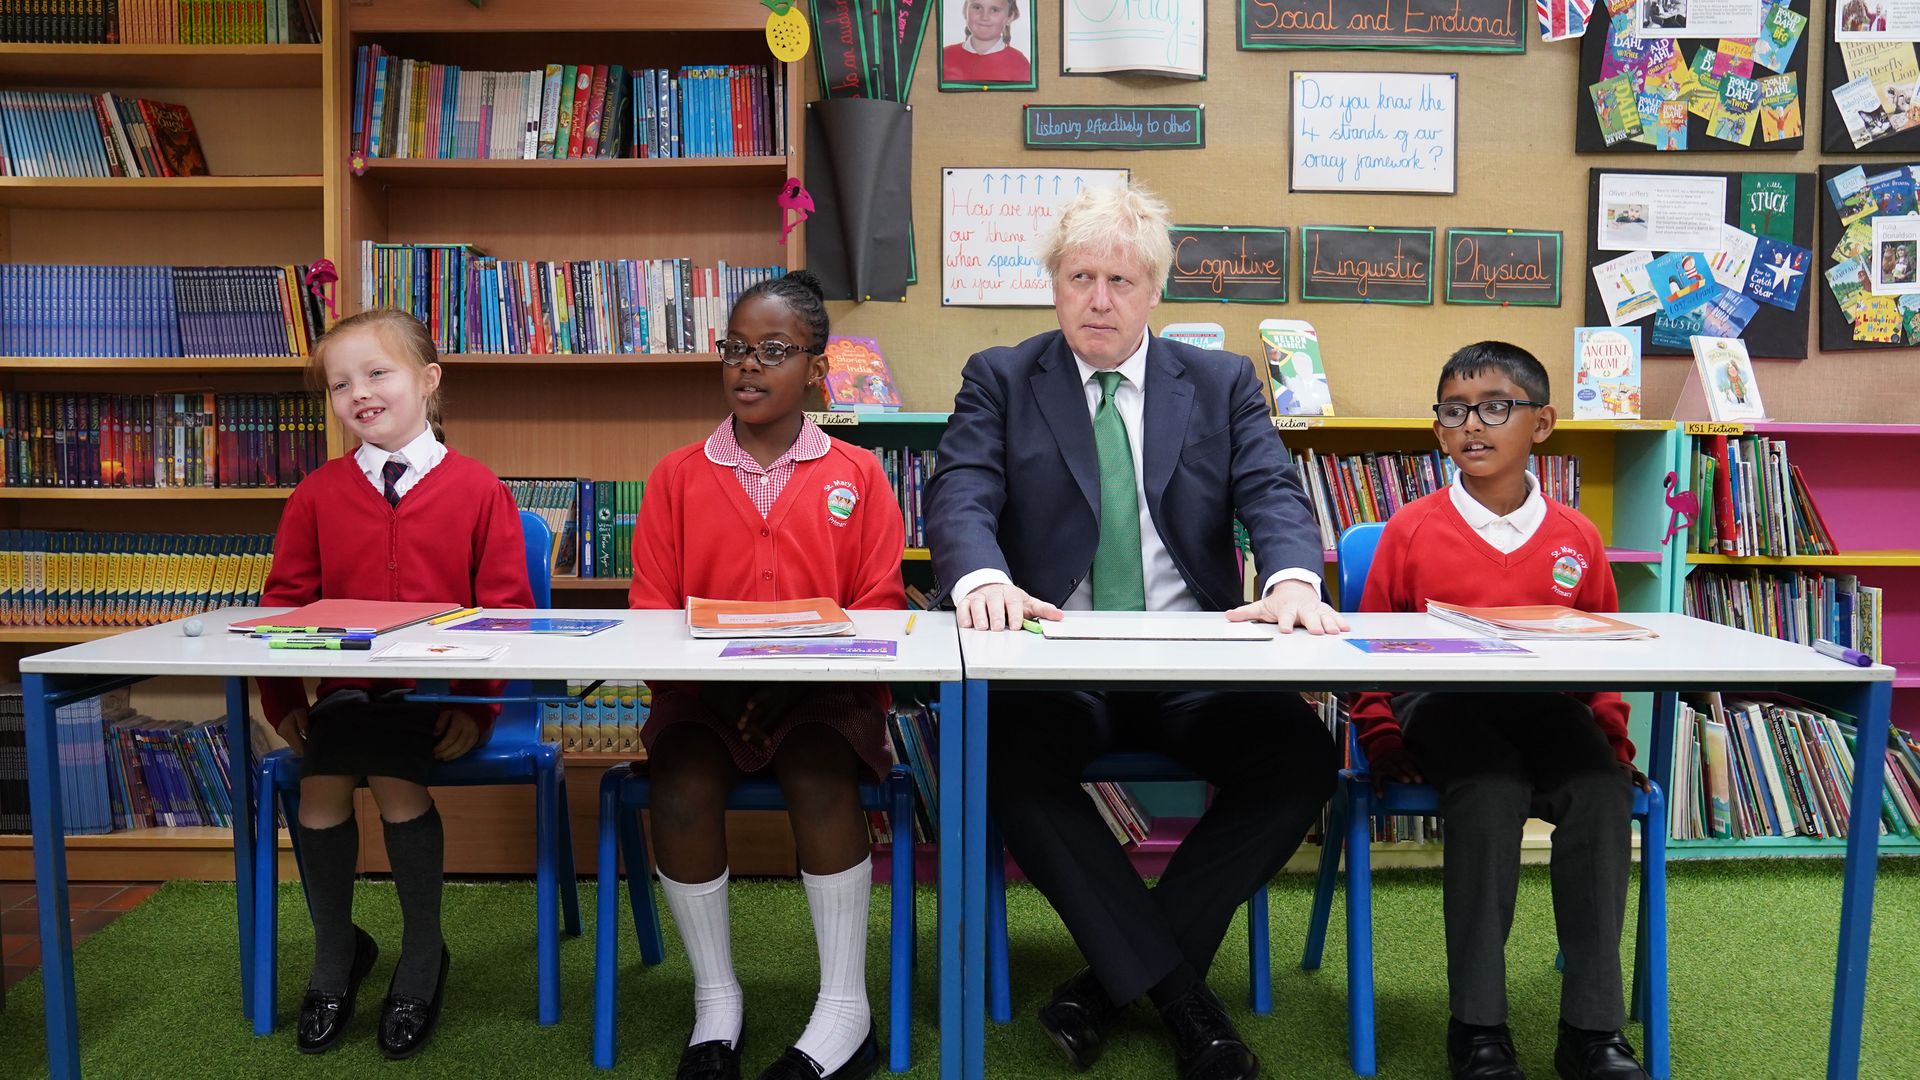 Prime Minister Boris Johnson during a visit to St Mary Cray Primary Academy, to see how they are delivering tutoring to help 